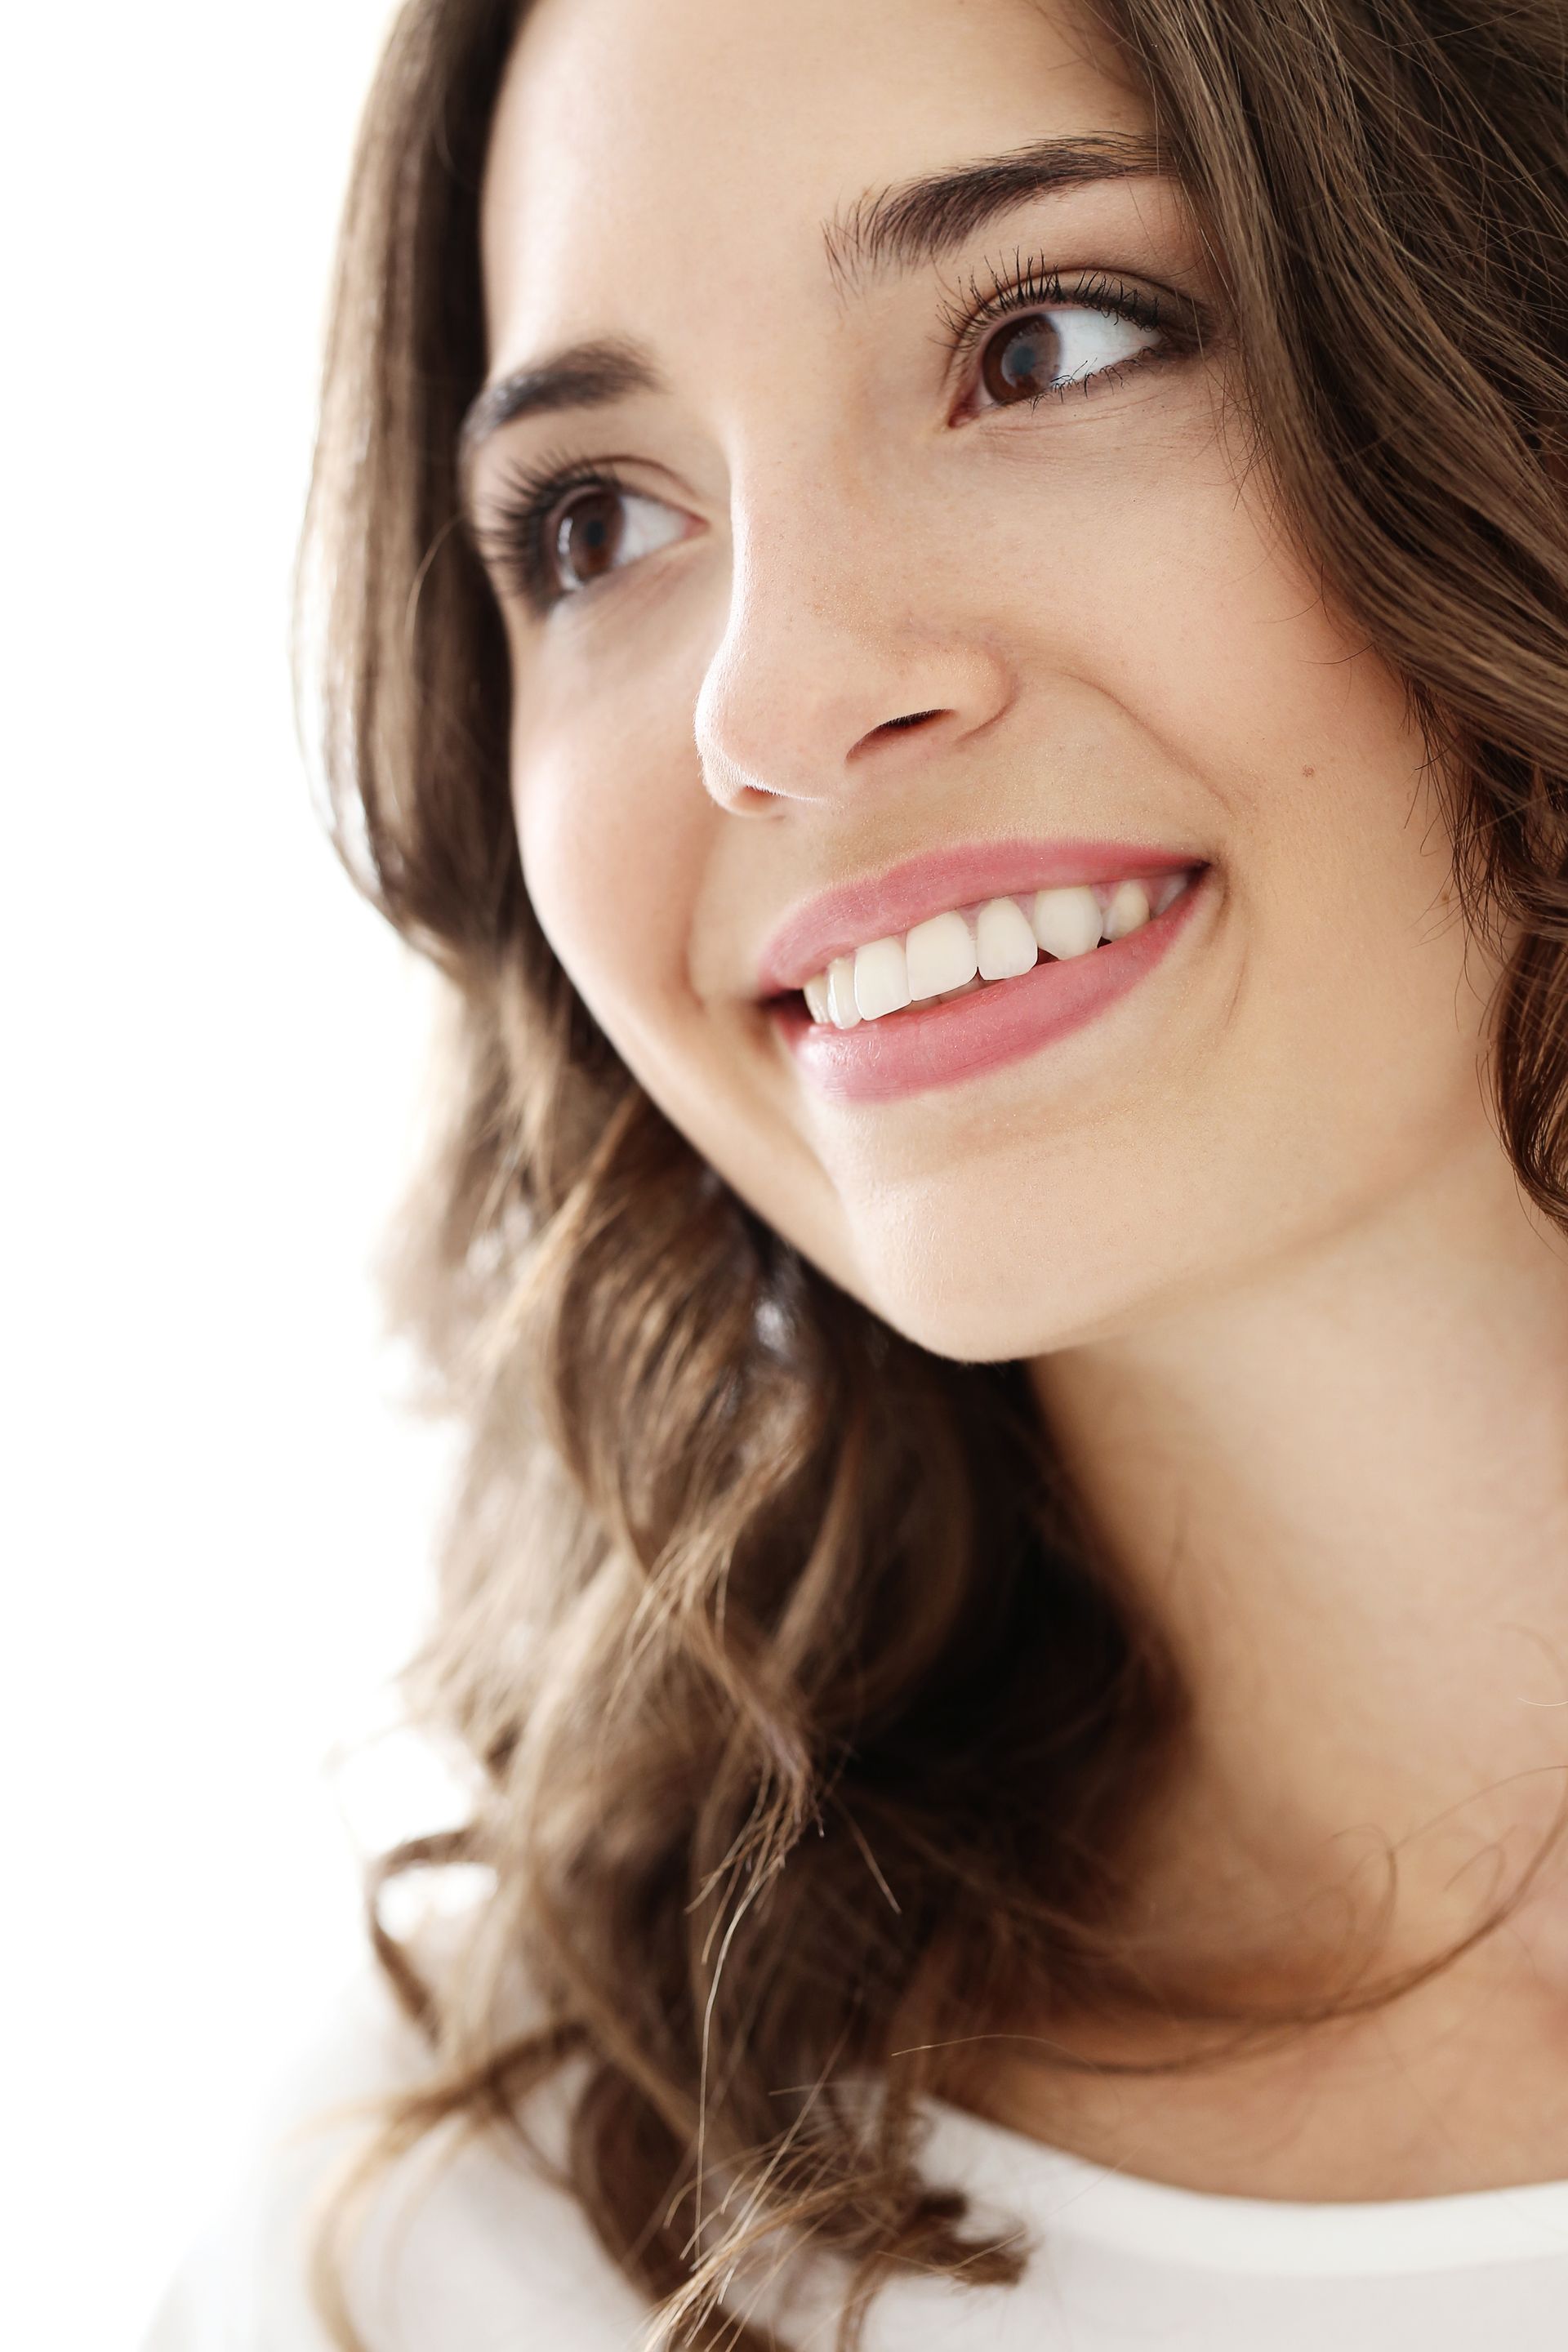 A close up of a woman 's face with a smile on her face.